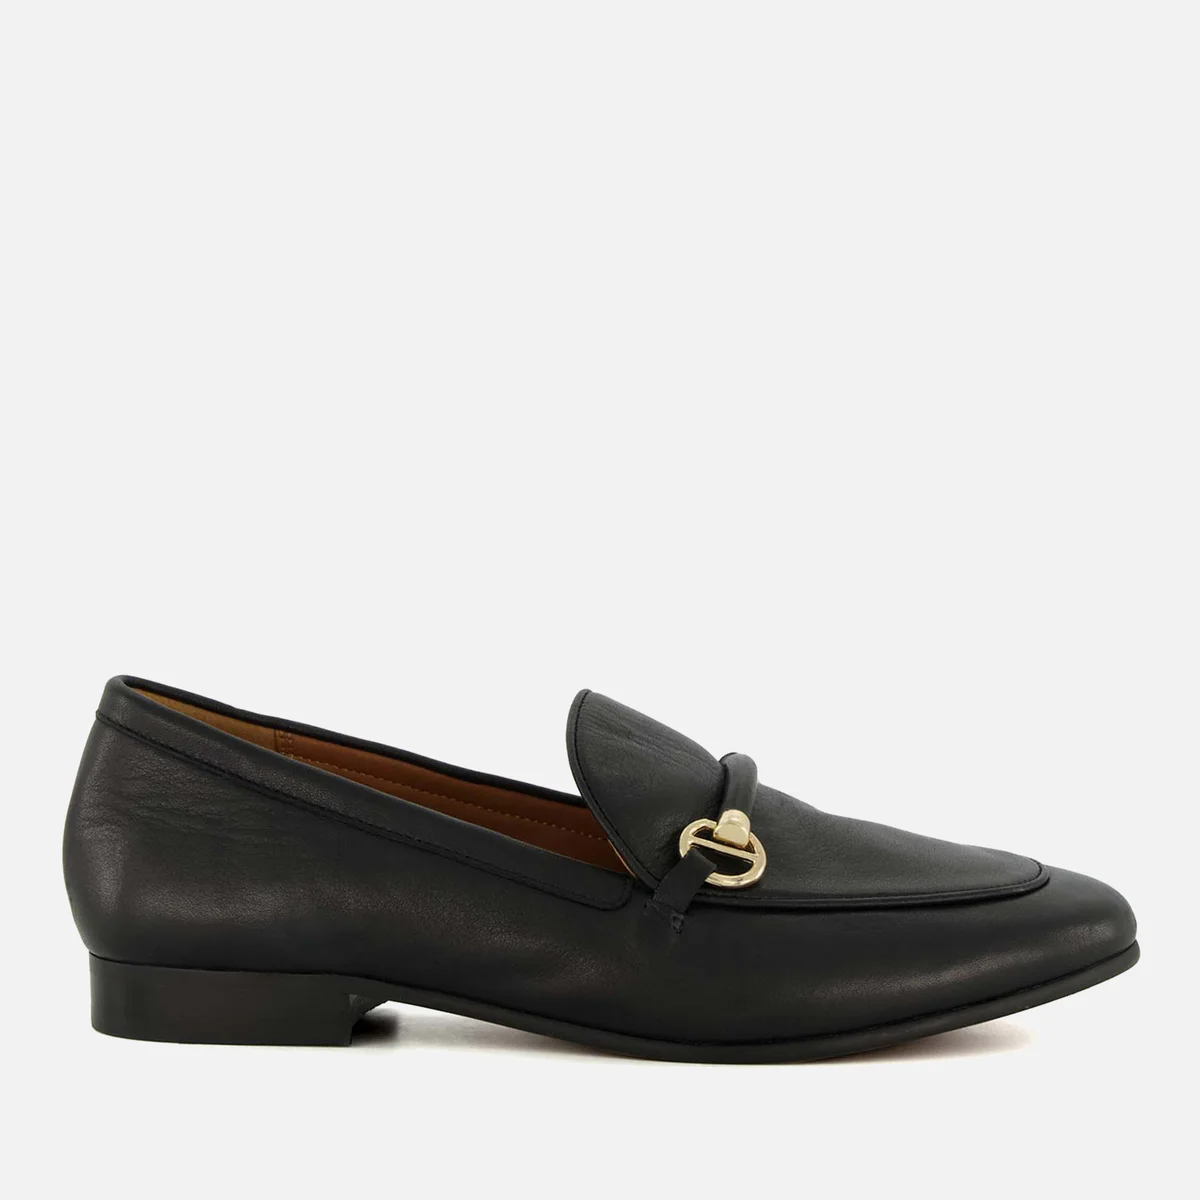 Dune Women's Grandeur Leather Loafers Image 1